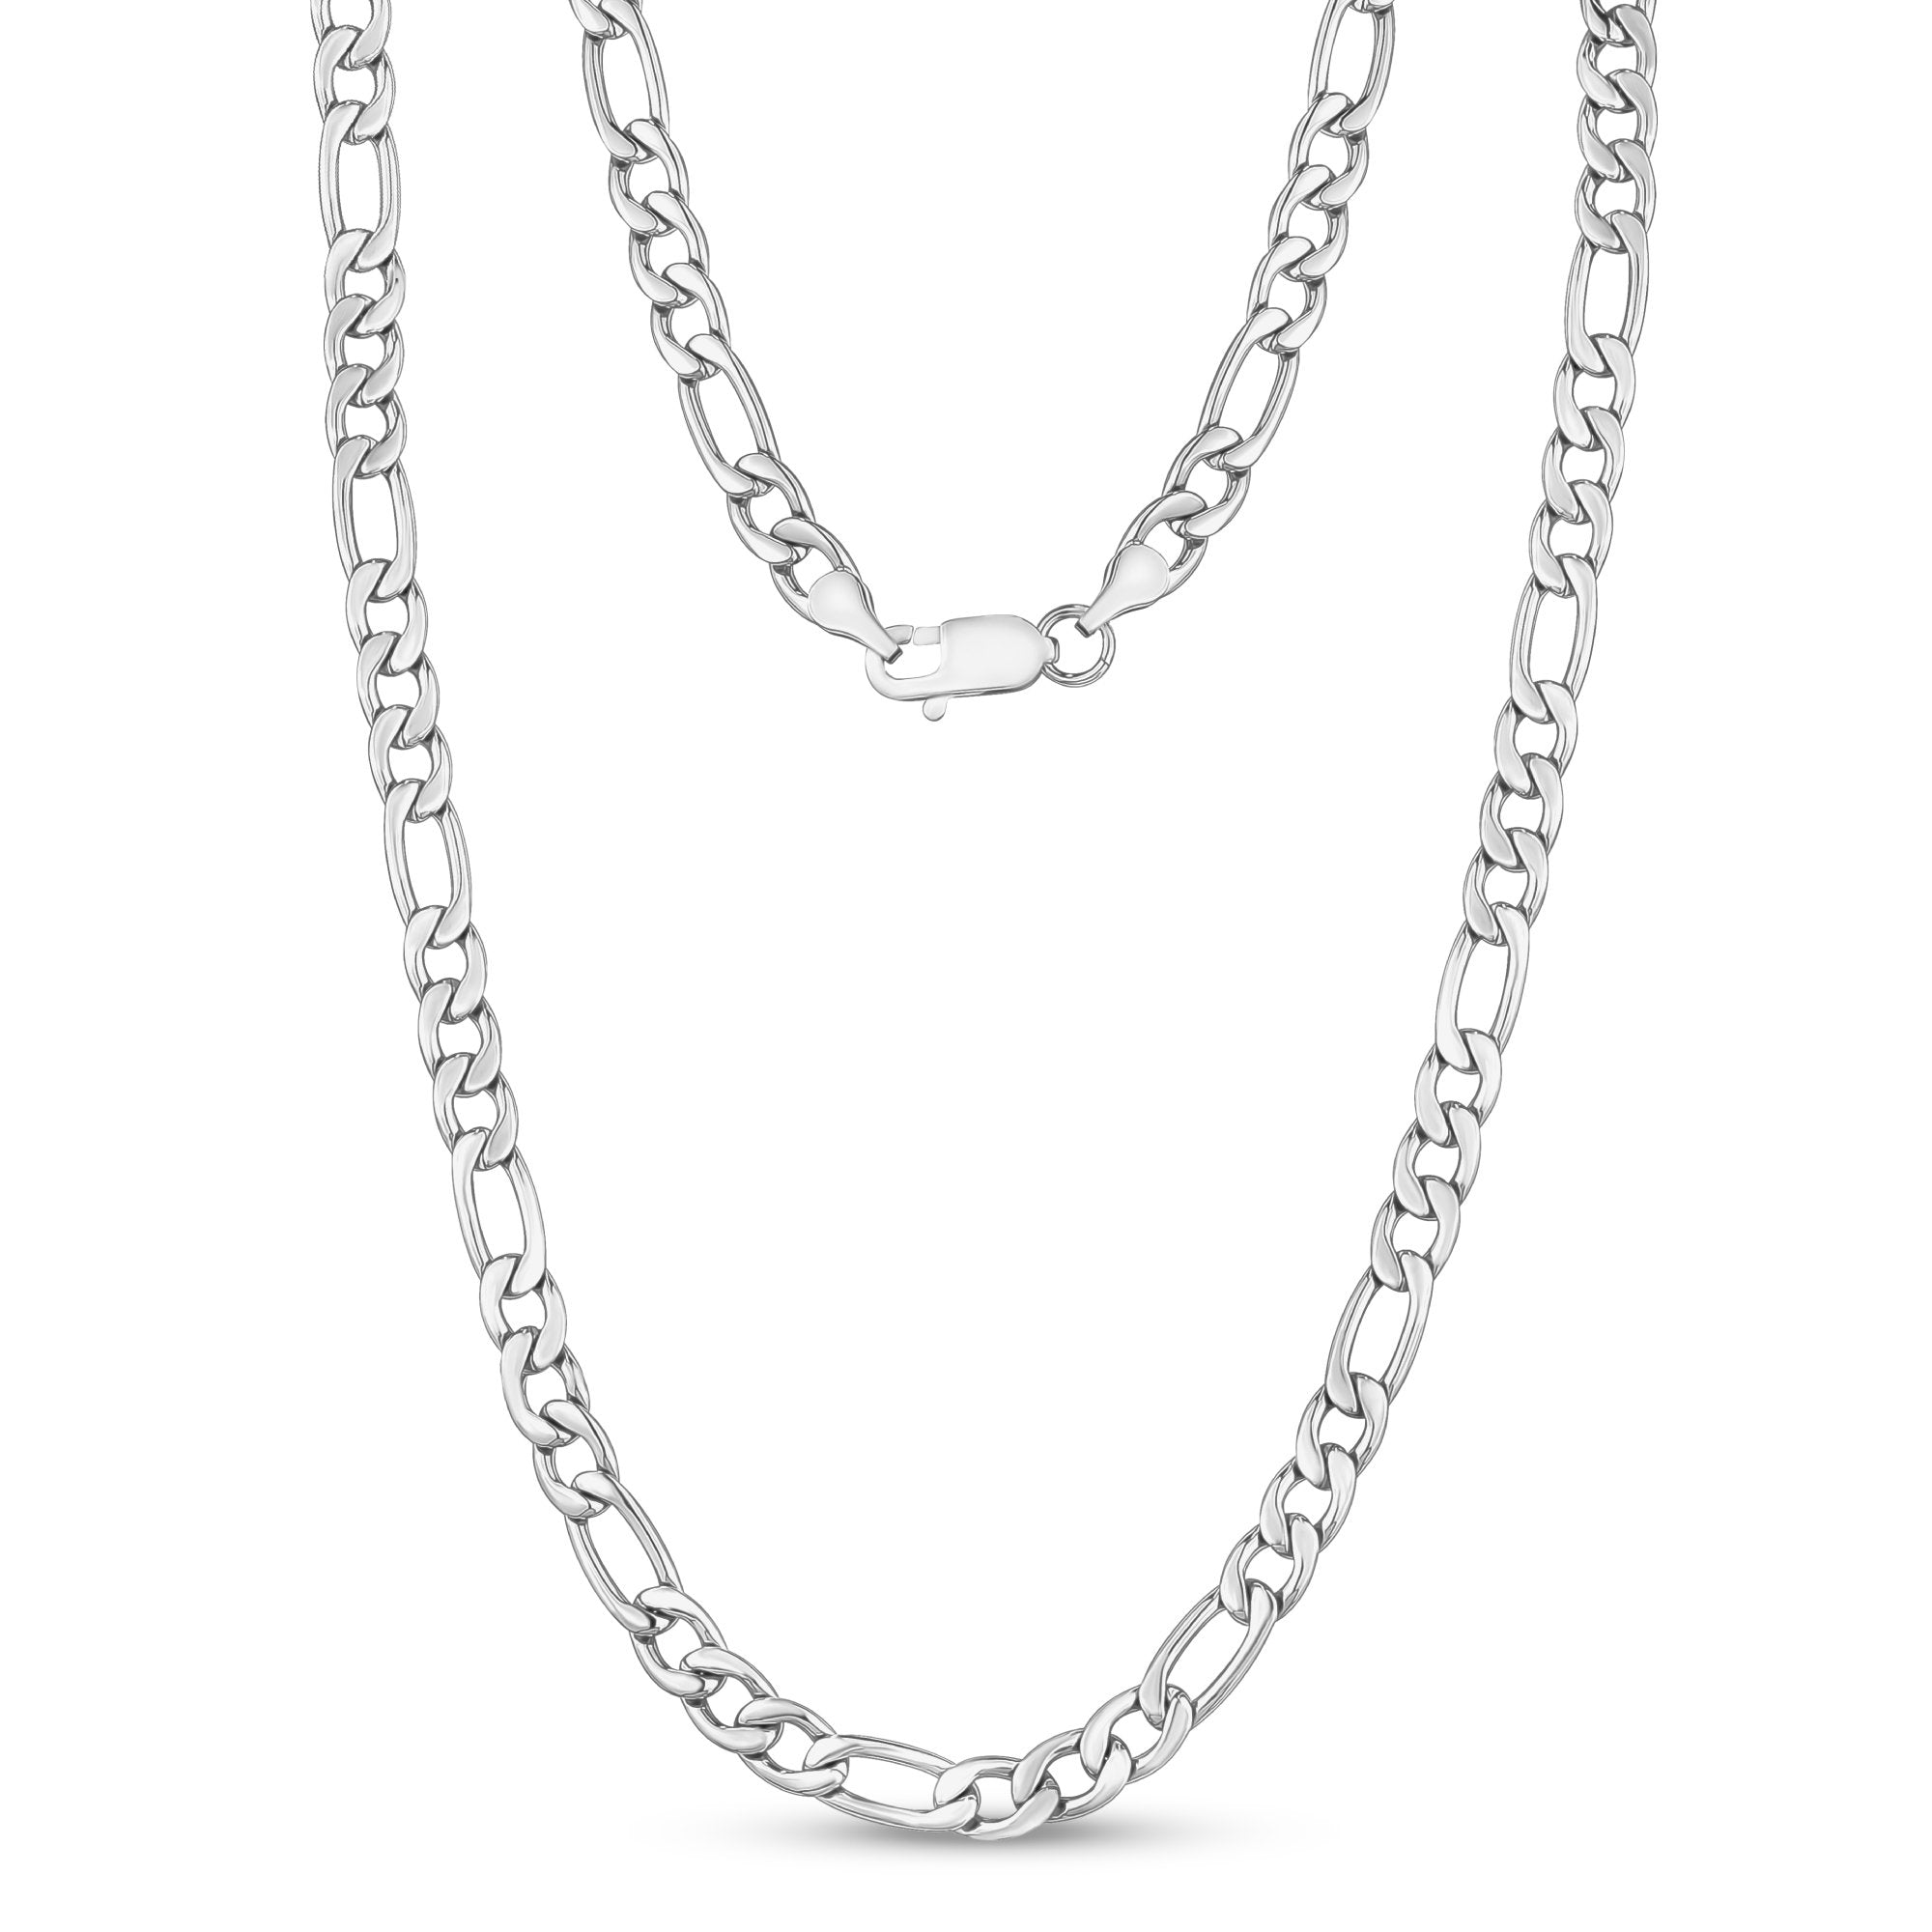 7mm Stainless Steel Mens Figaro Chain Necklace 24 Inches / Silver